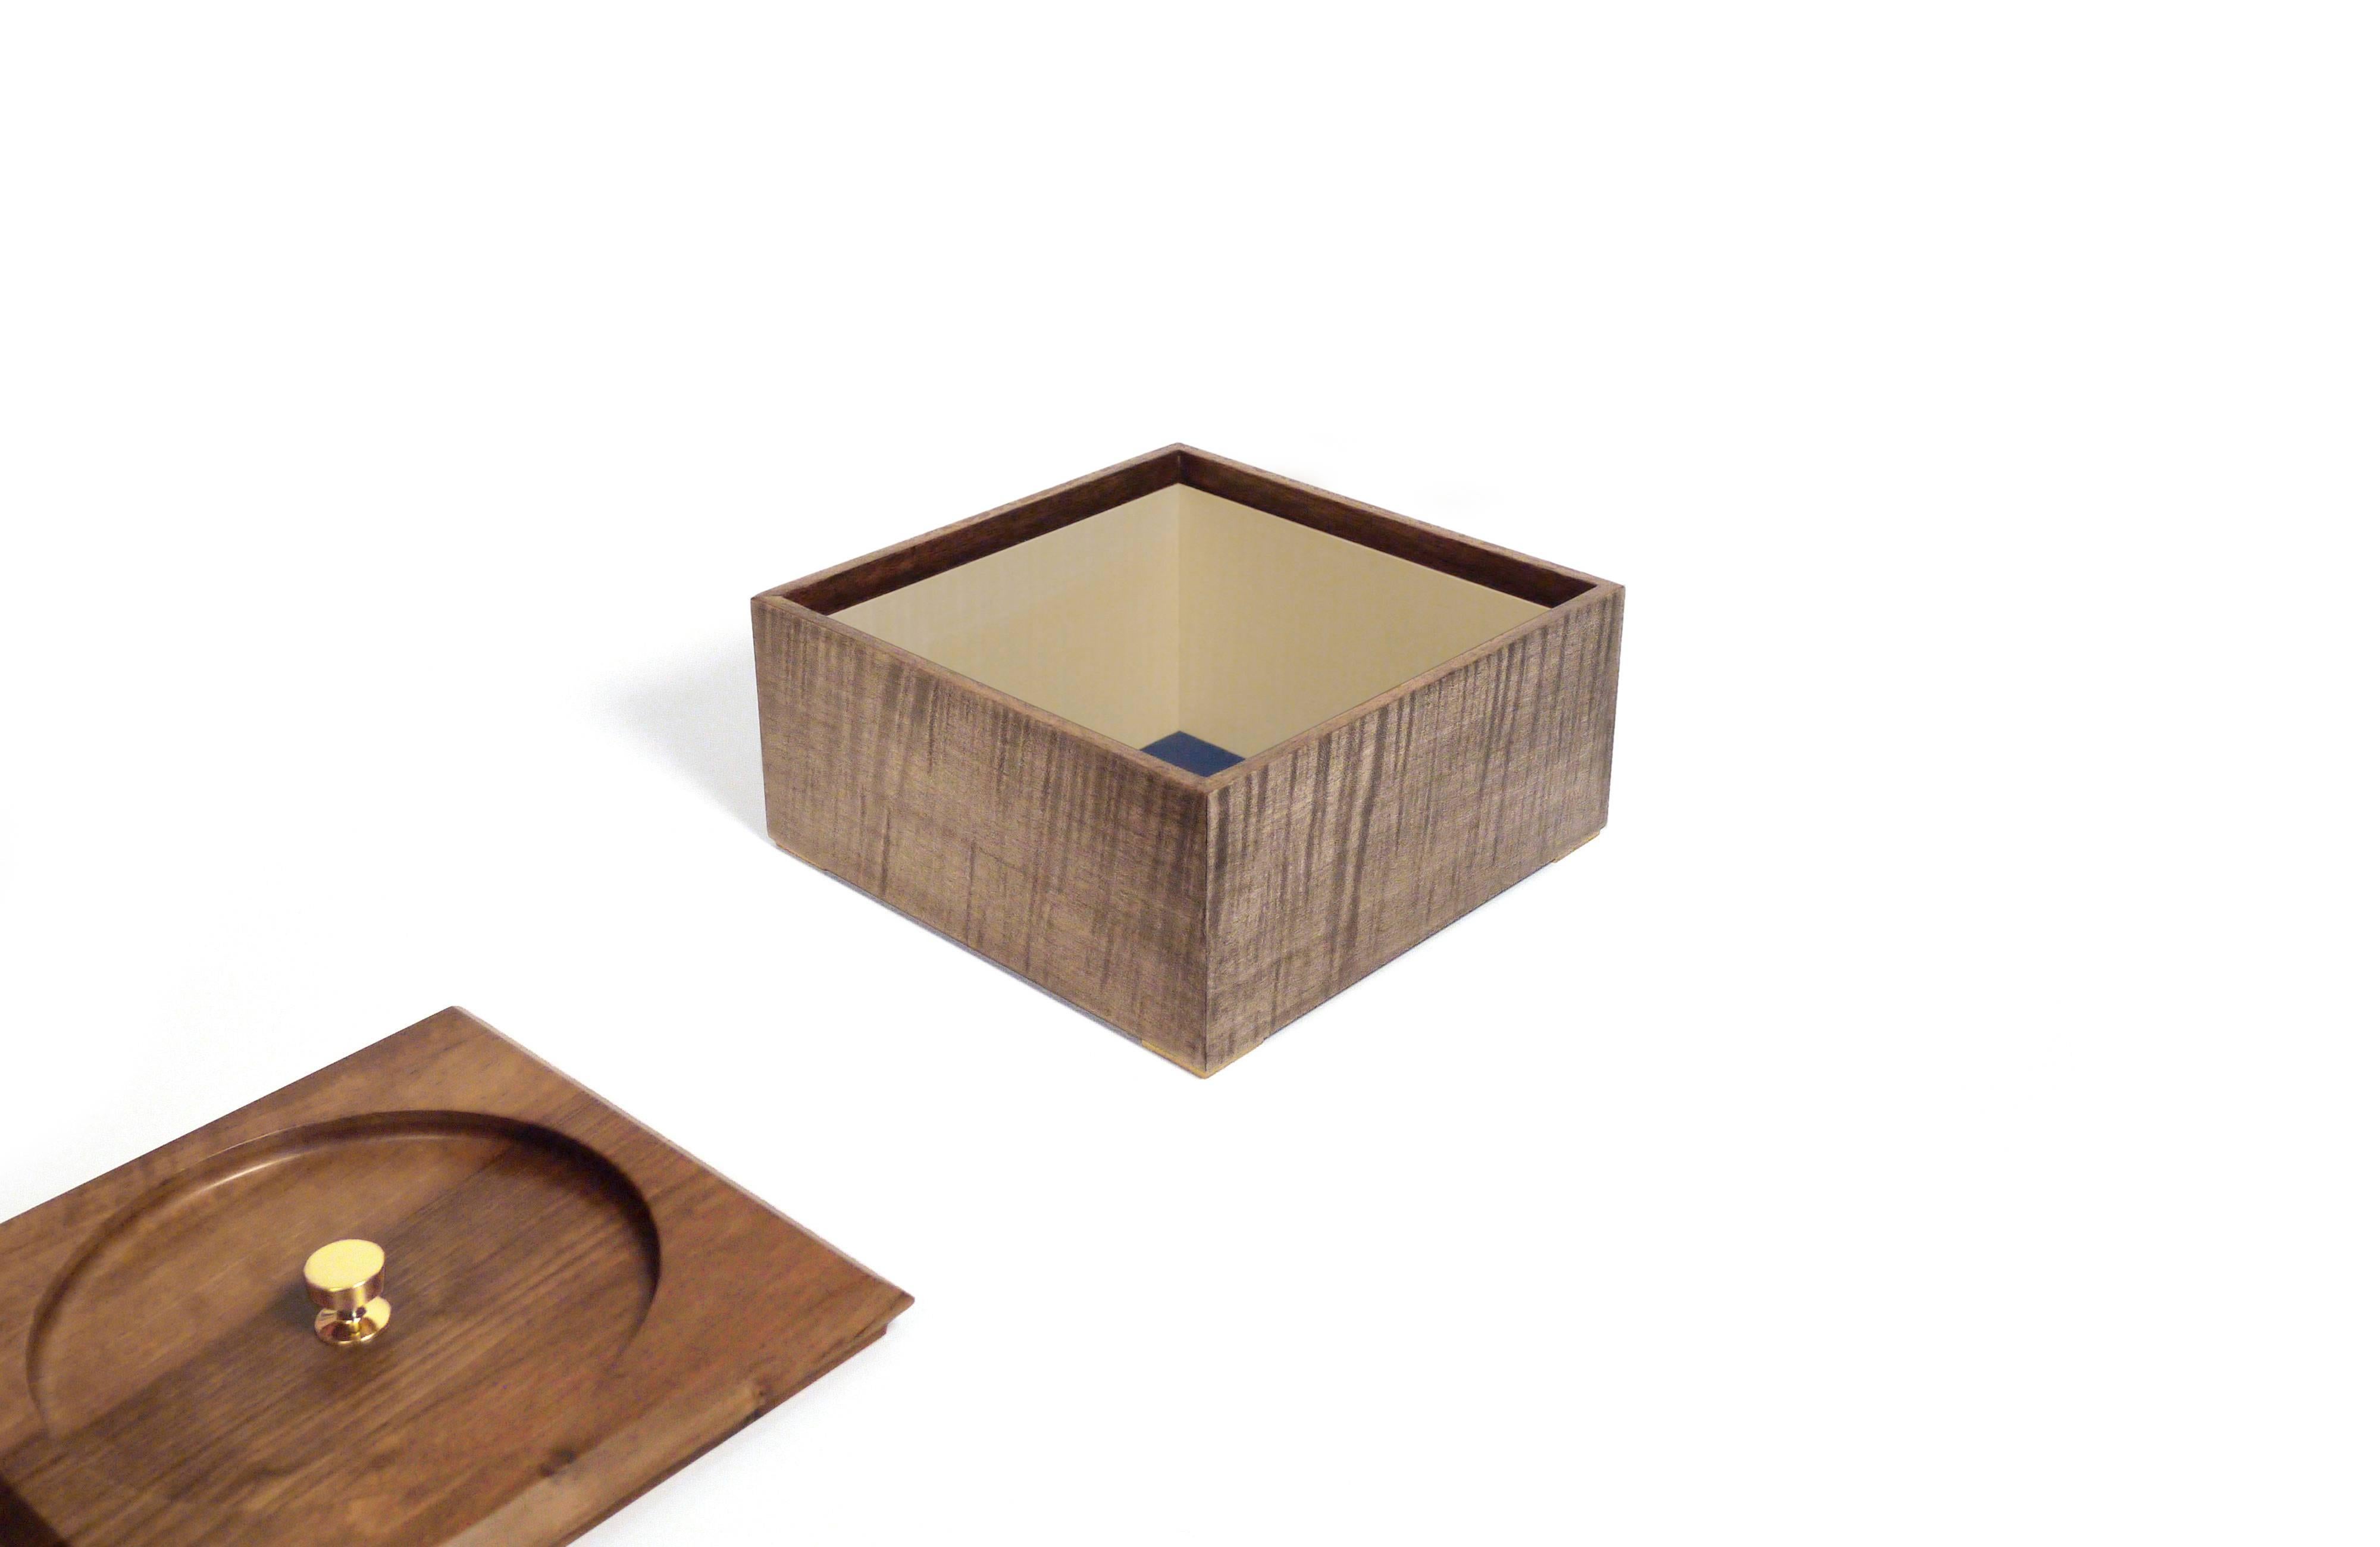 Part of Les Few's Vanina Vanini collection, this contemporary, sycamore and brass, modern, Minimalist wood box is made by artisans in Sweden. The box comes with the choice of a leather interior in granite grey, anthracite, navy, powder pink and